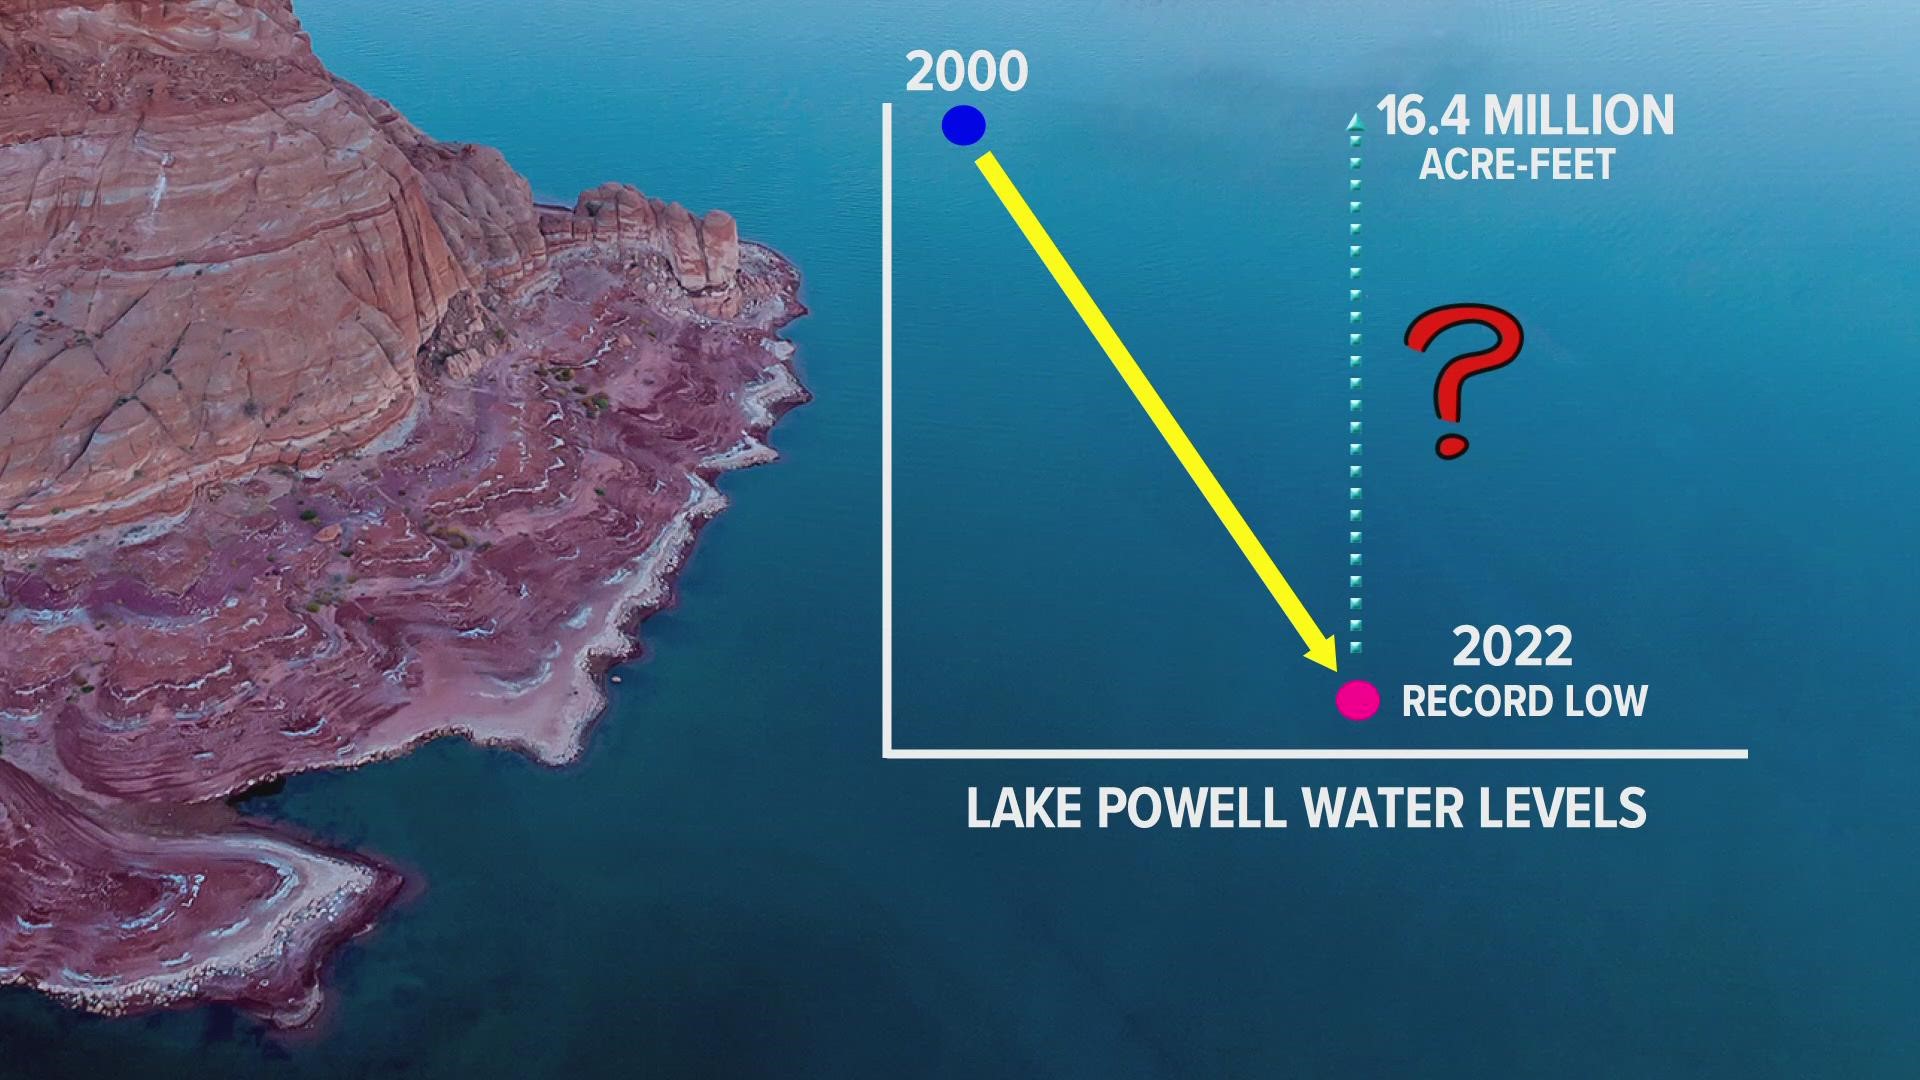 Hydrologists estimate that it would take 15 years of "above average" snowpack, to fill Lake Powell back up to peak levels.